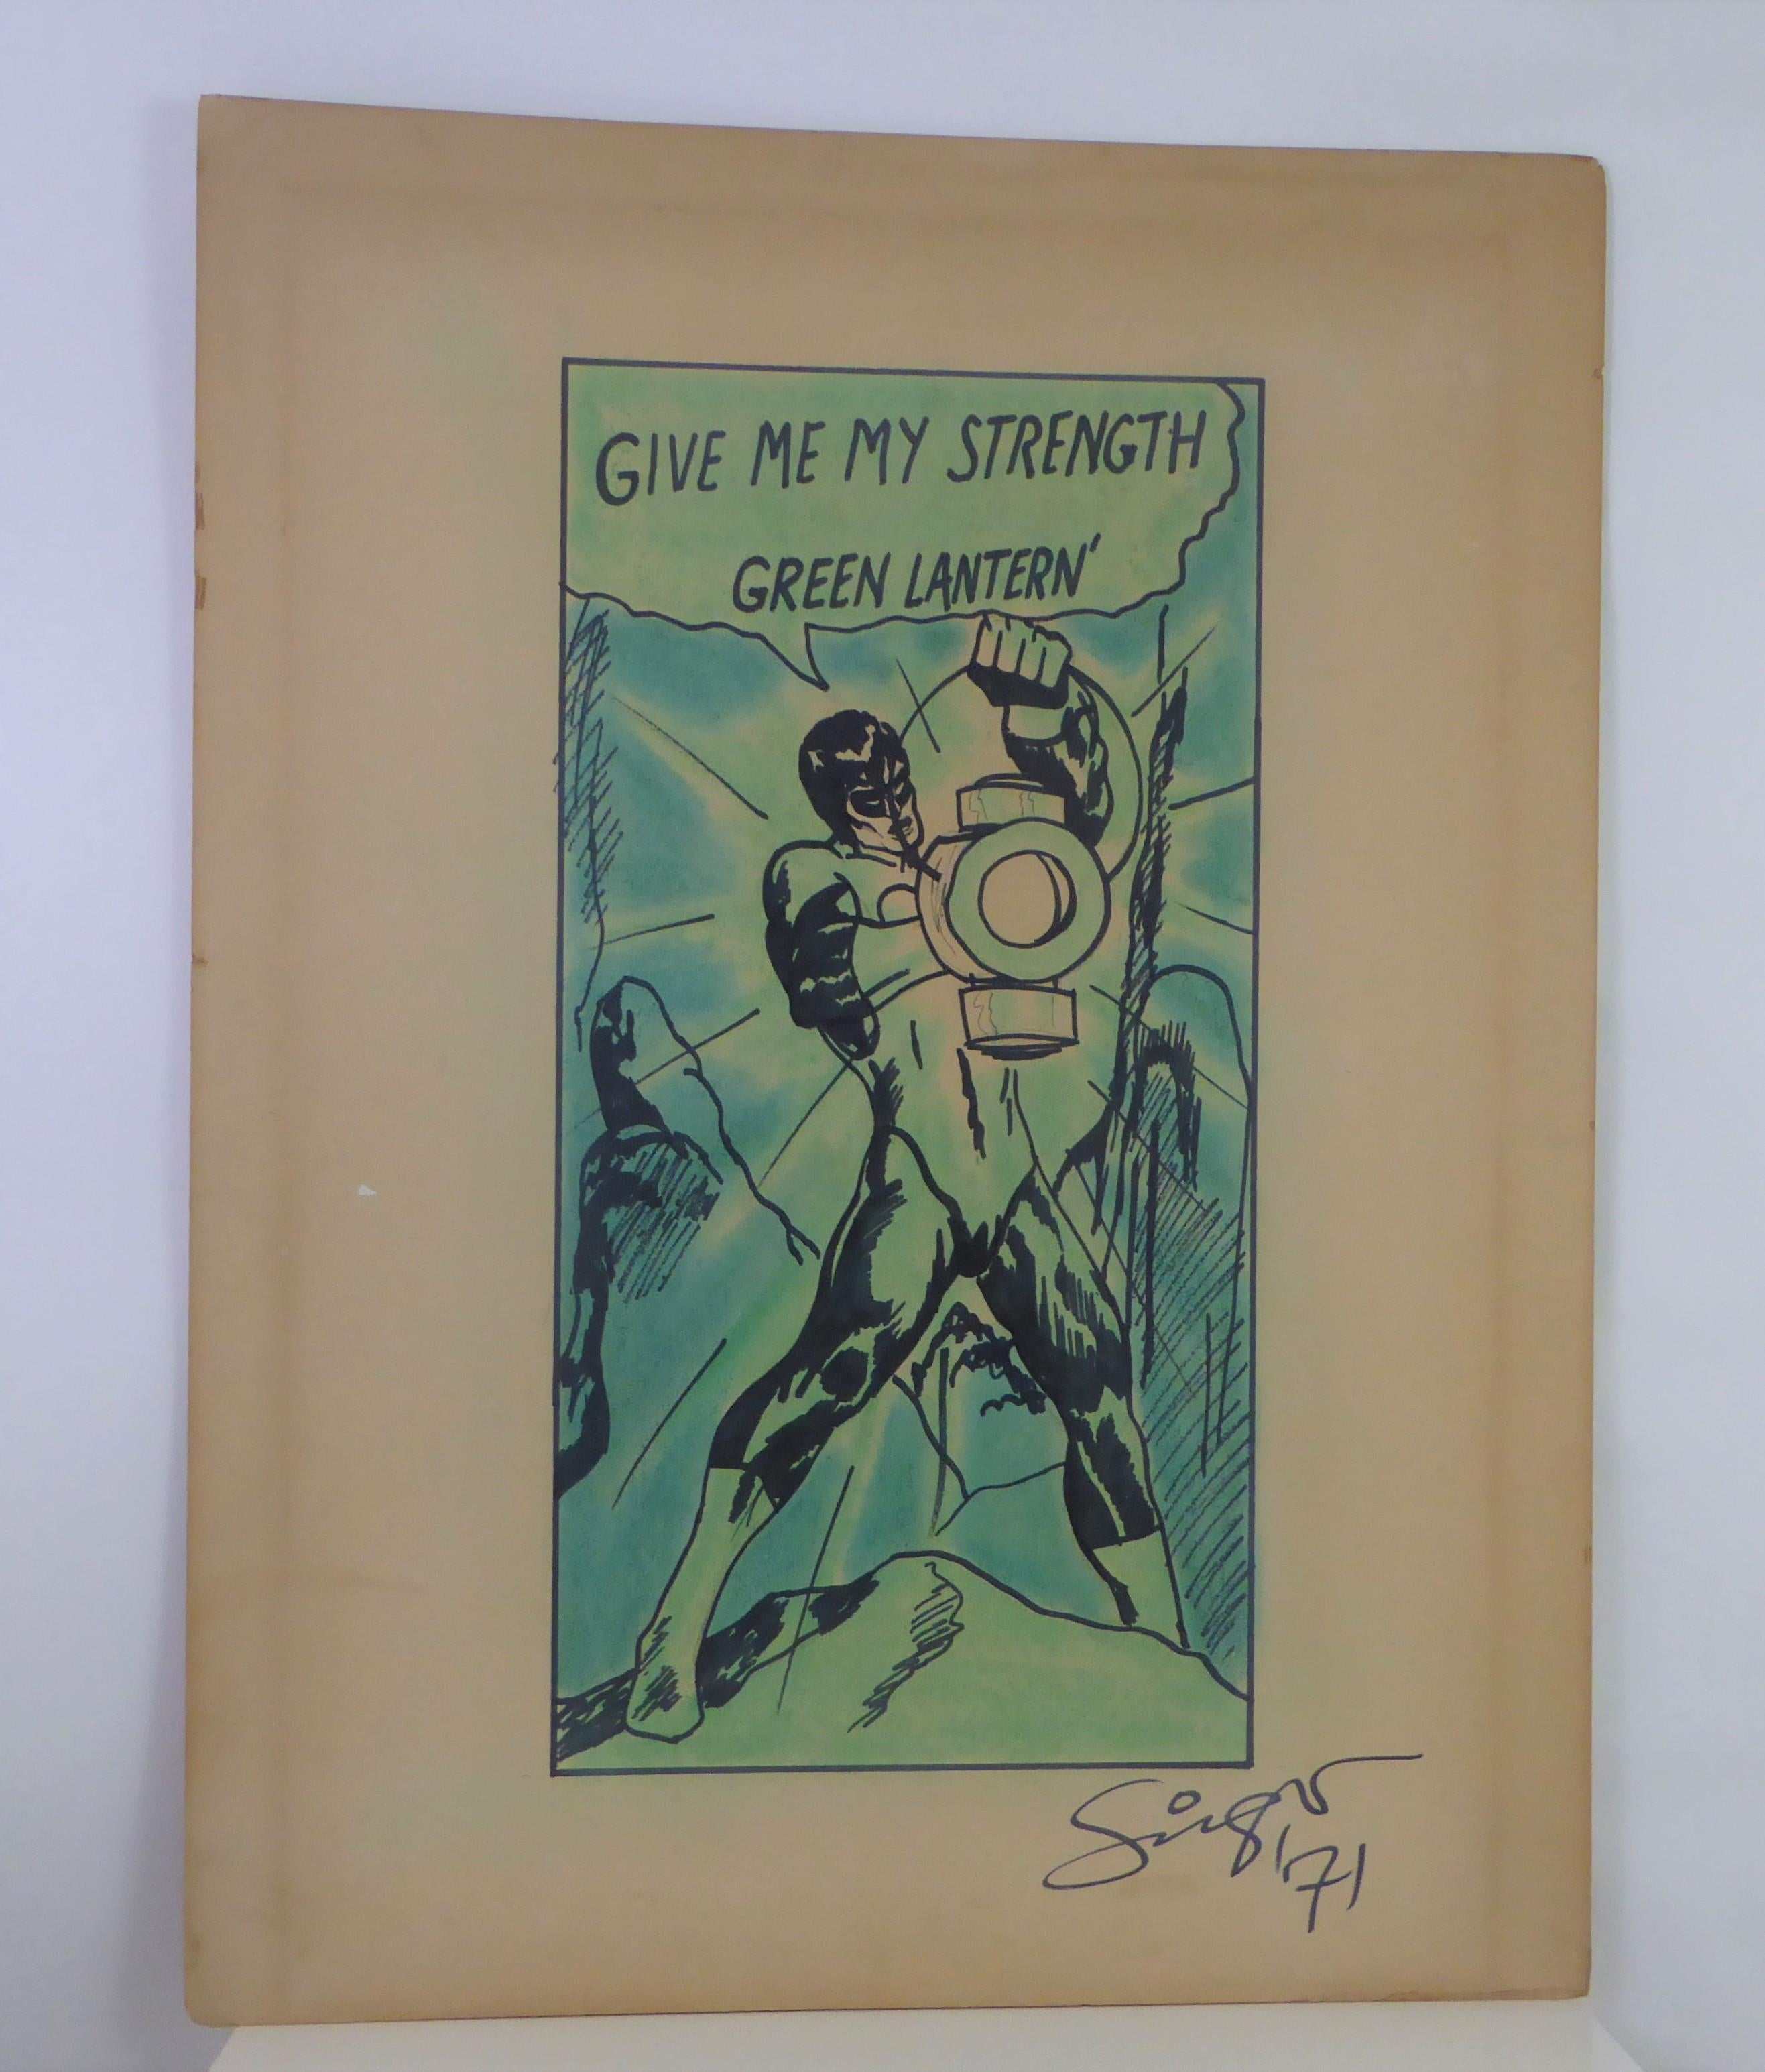 REDUCED FROM $750....Large watercolor and ink painting on illustration board of the green lantern, artist-signed, 1971.
Measurements: 40 inches high by 30 inches wide.
Watercolor and ink on thick illustration board. Artist-signed, 1971.
Recently the